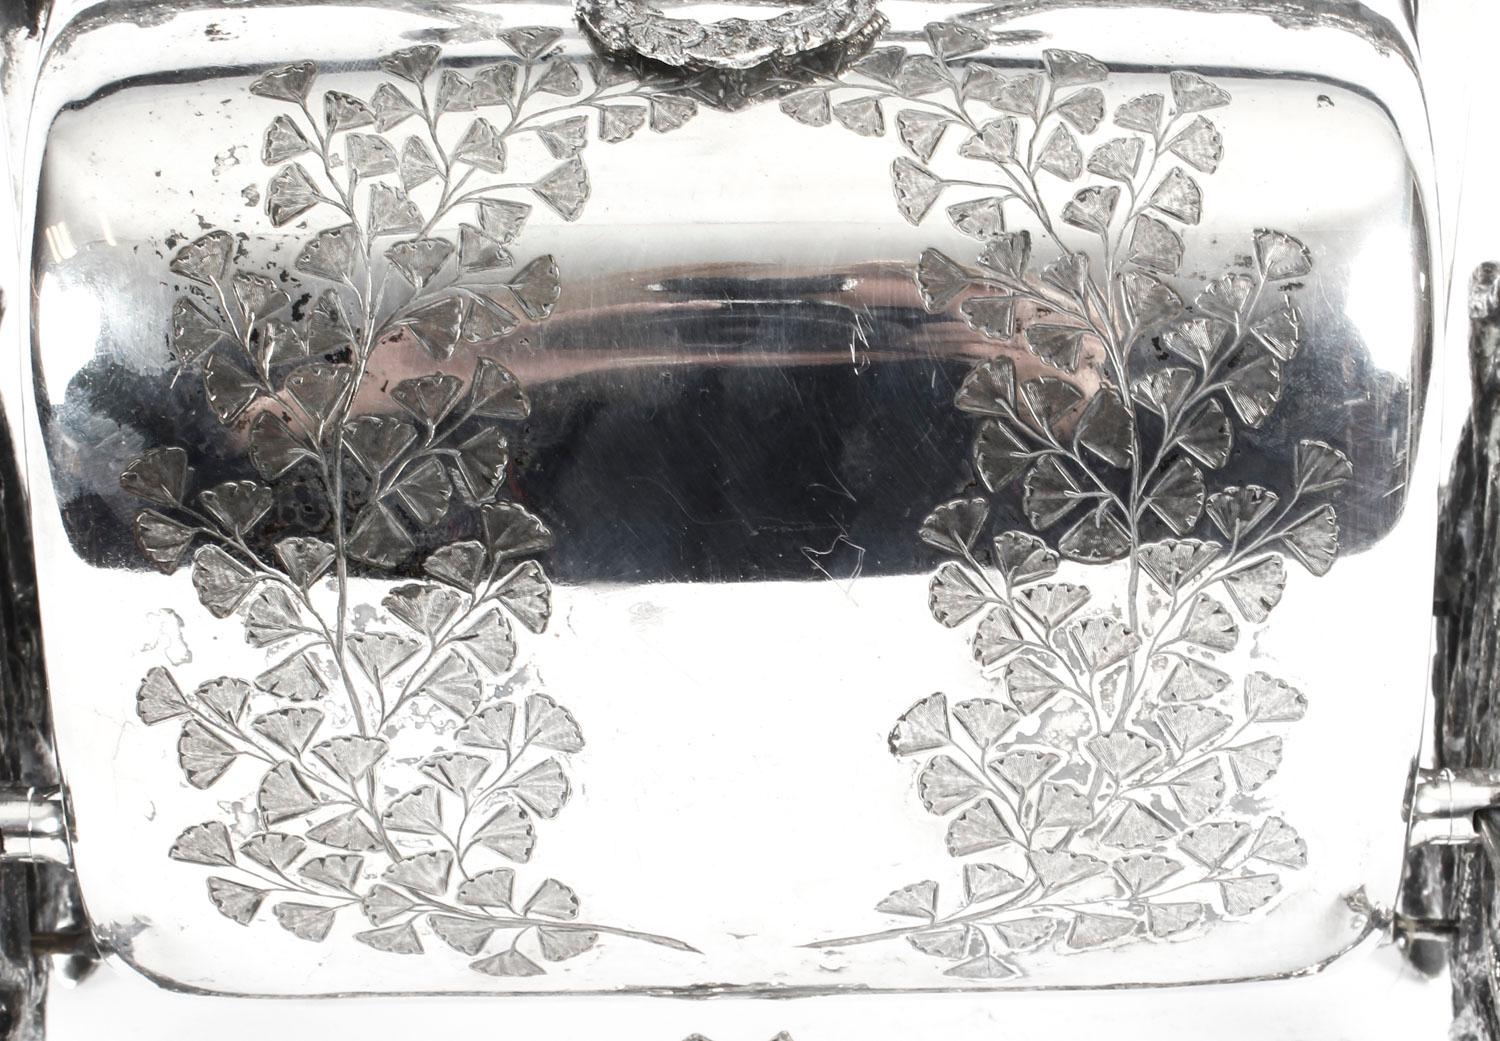 Antique English Silver Plated Folding Sweets Biscuit Box, 19th Century 1